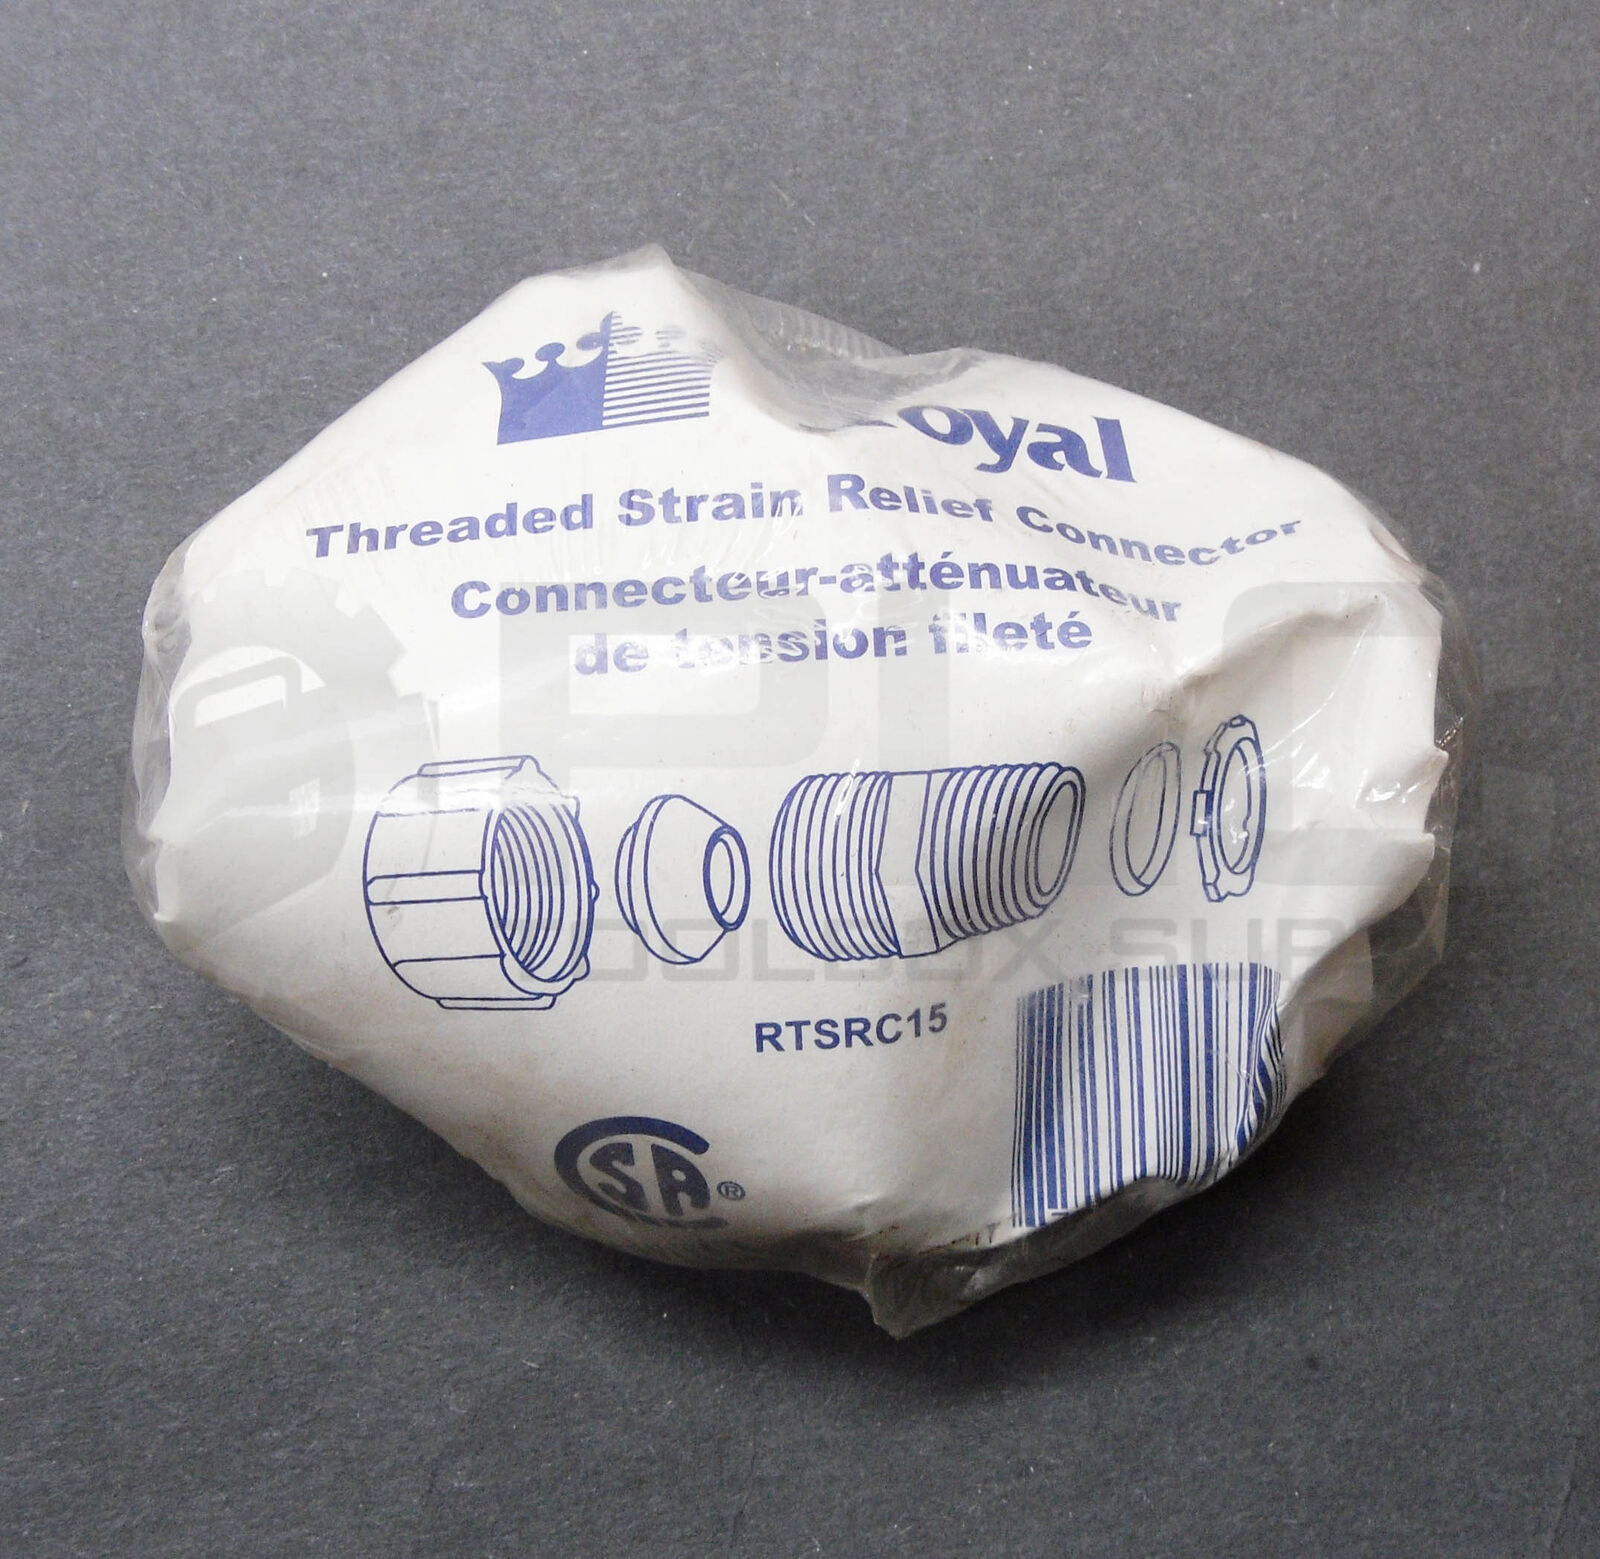 SEALED NEW ROYAL RTSRC15 THREADED STRAIN RELIEF CONNECTOR